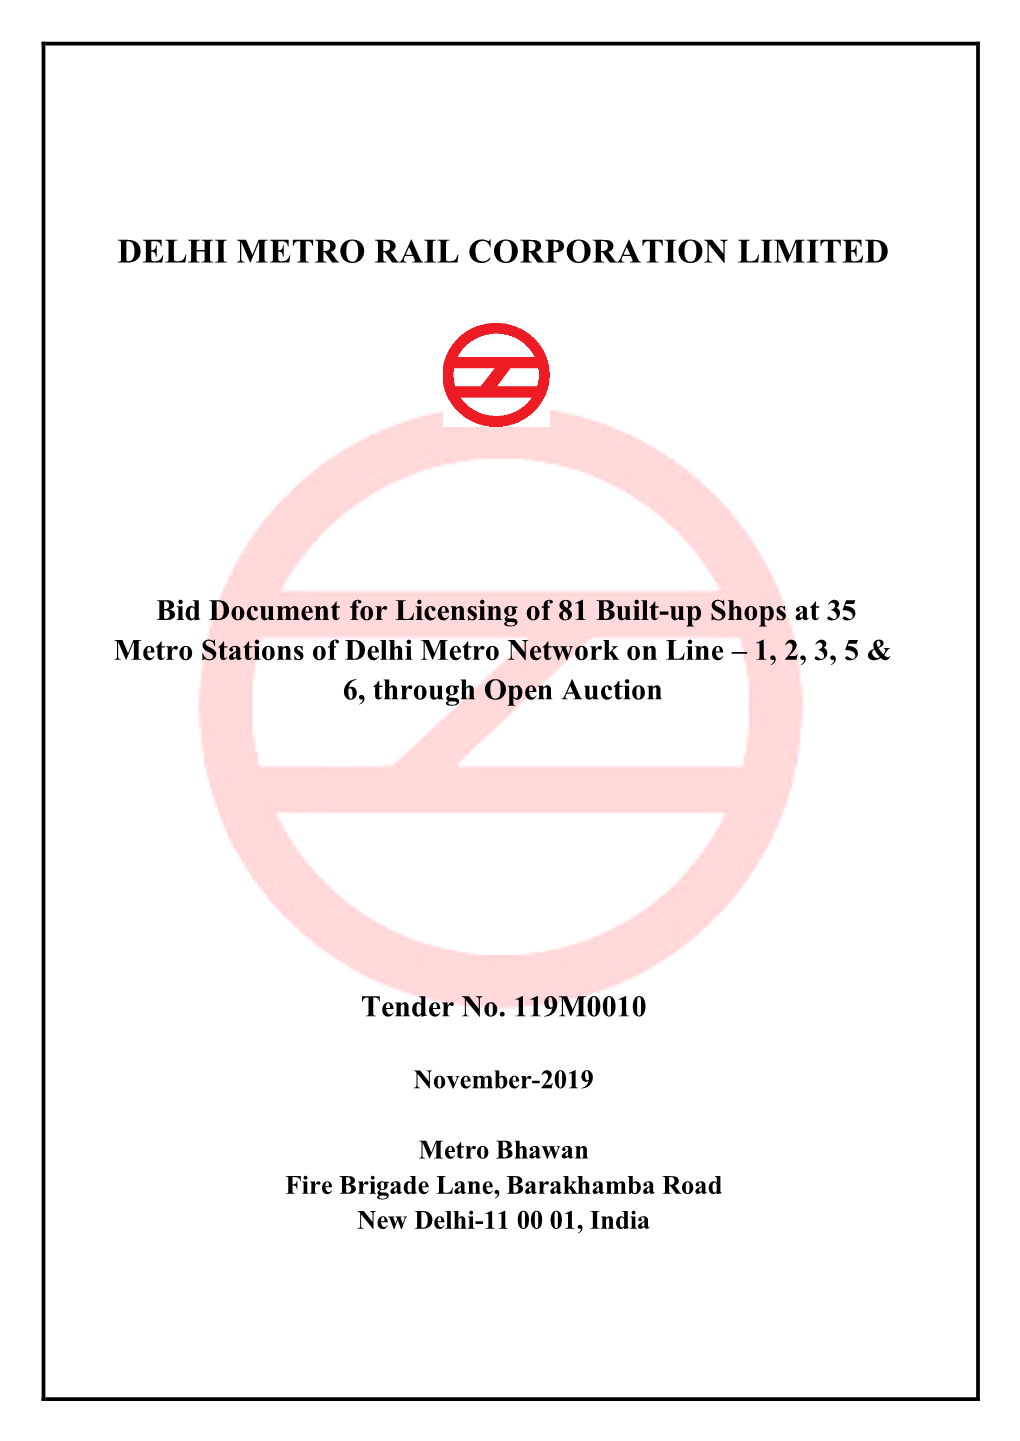 Bid Document for Licensing of 81 Built-Up Shops at 35 Metro Stations of Delhi Metro Network on Line – 1, 2, 3, 5 & 6, Through Open Auction